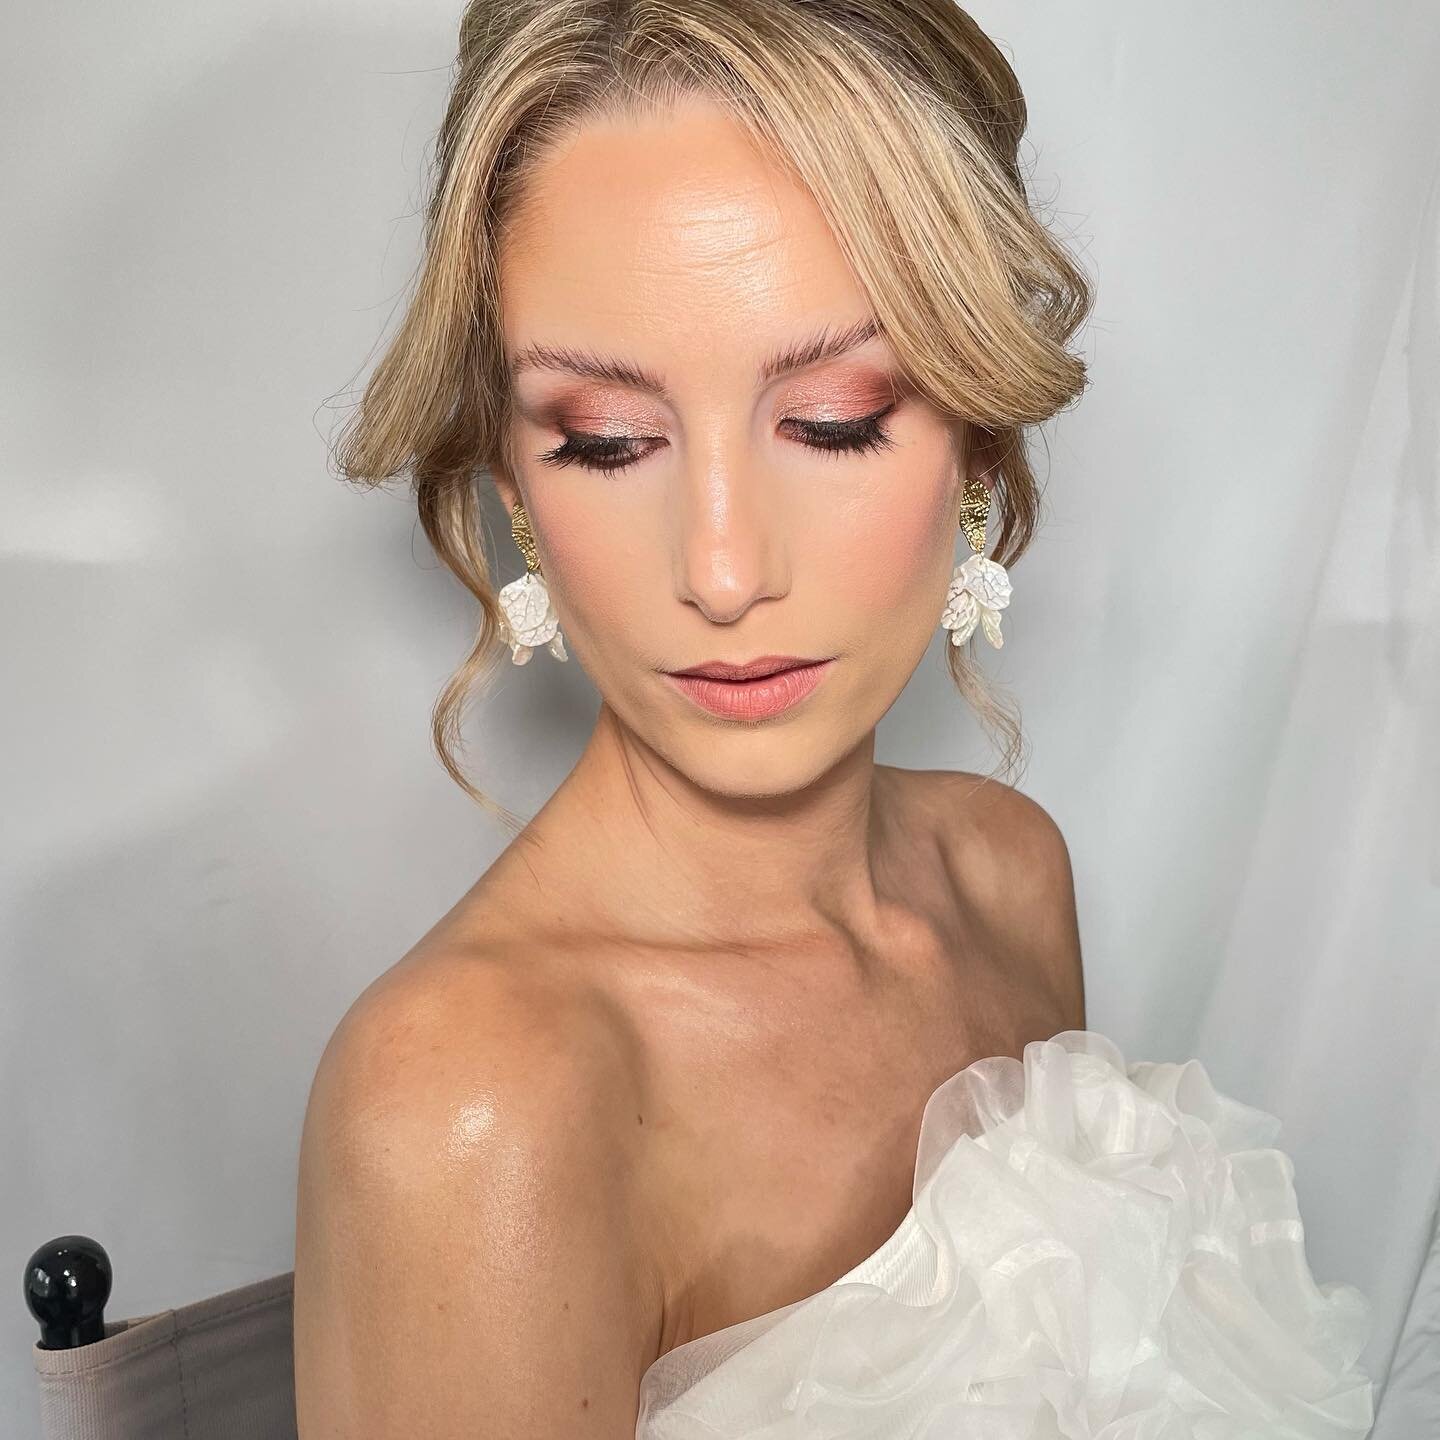 ✨ Bridal Makeup ✨

I have no words, she&rsquo;s beautiful &hellip; I couldn&rsquo;t choose one photo, so here&rsquo;s six 🥰💜

FLAWLESS, GLOWING, TIMELESS makeup! 

Working alongside @sophiefrank_undertheveil 💋

Inspired by @botiashairandmakeup aft